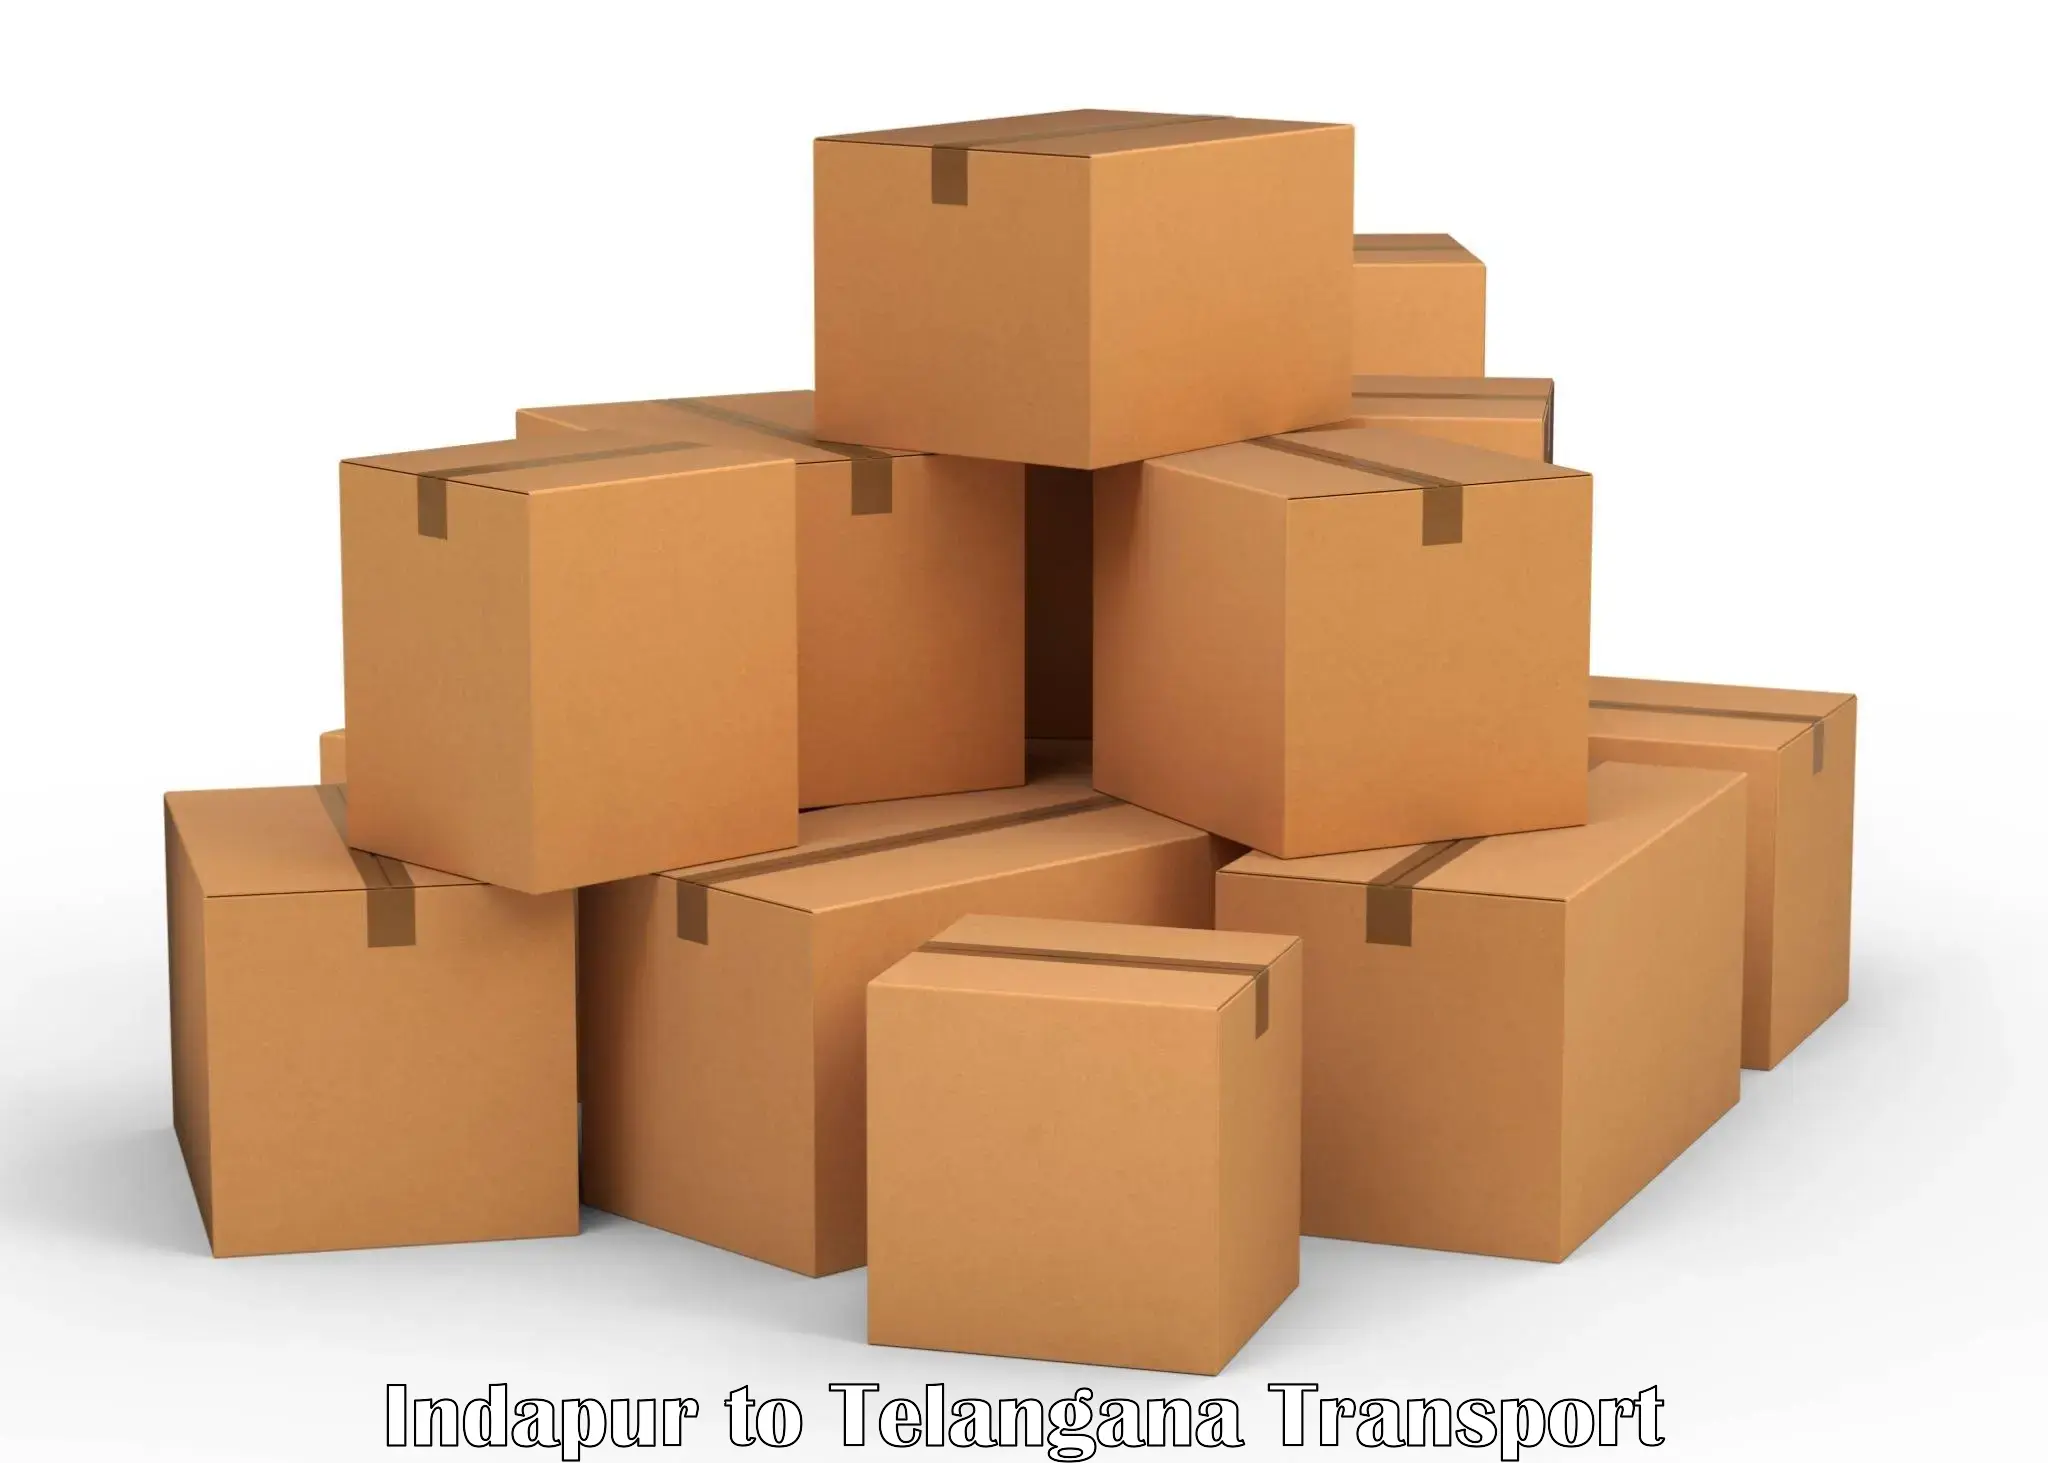 Luggage transport services in Indapur to Bhadrachalam